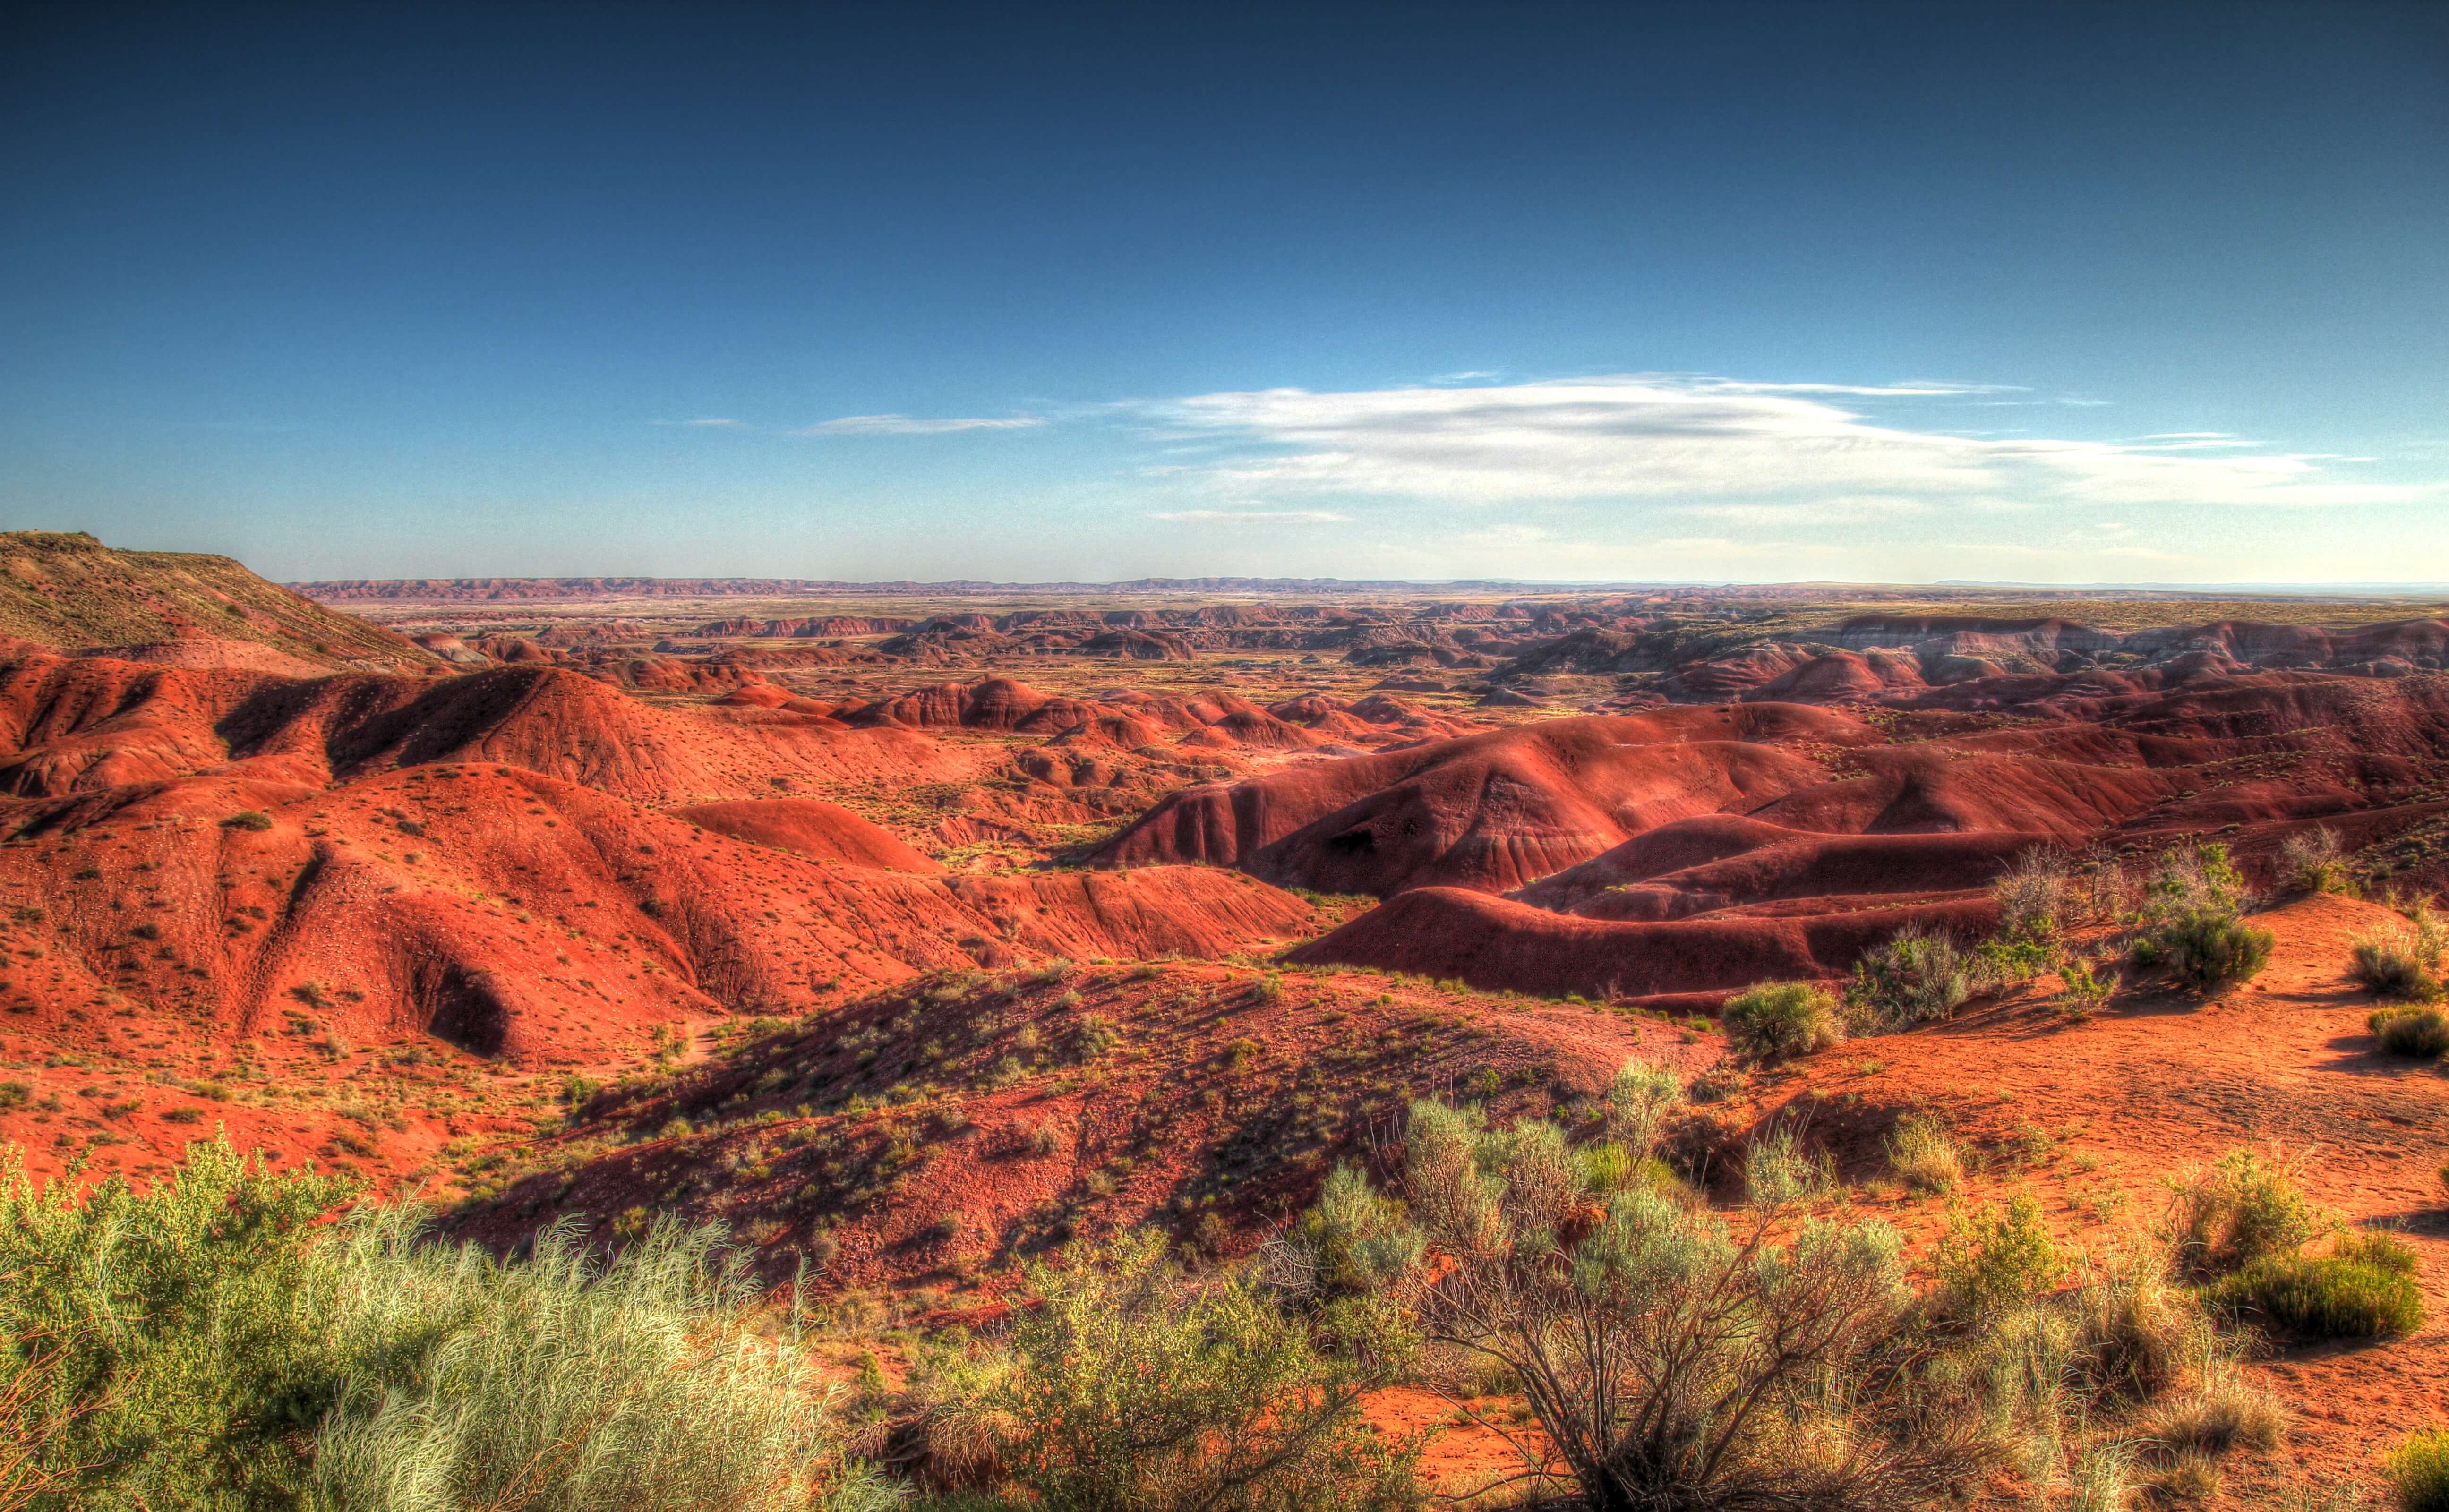 Shot looking over the Painted Desert landscape.